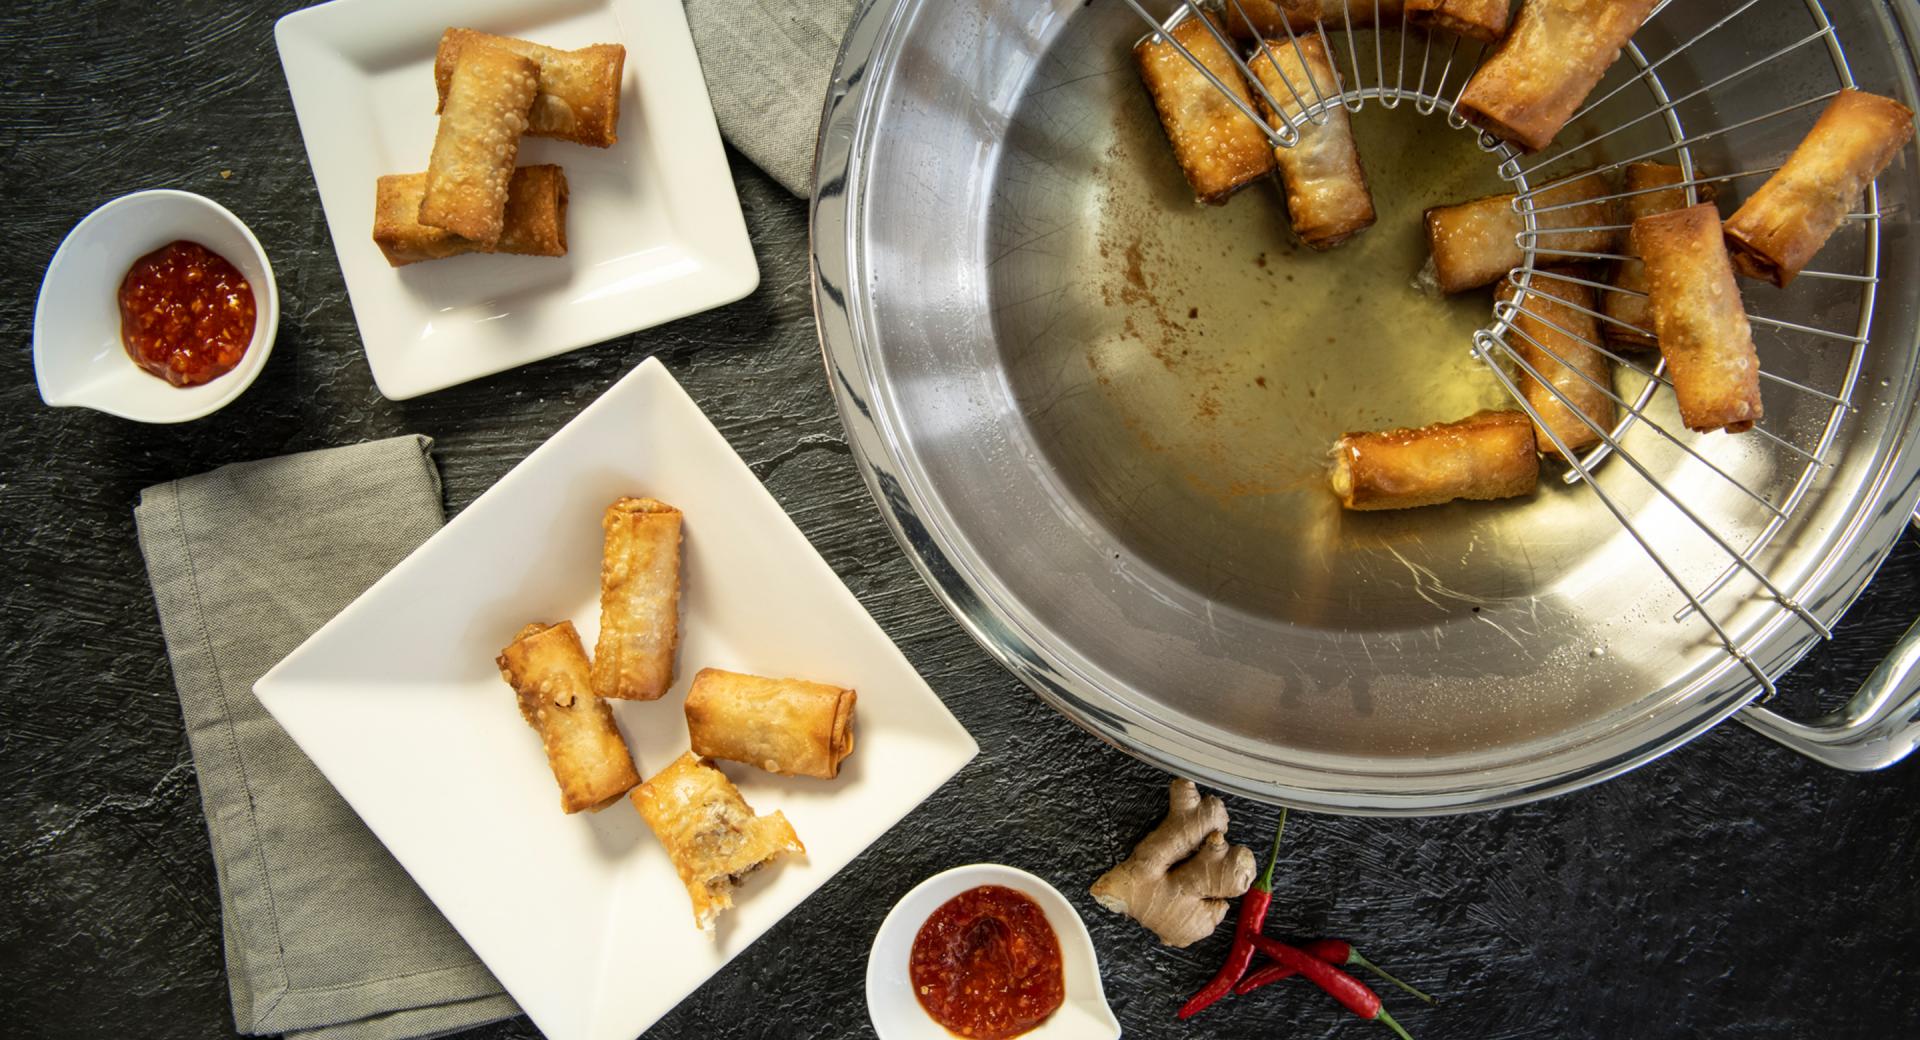 Spring rolls with sweet and hot sauce